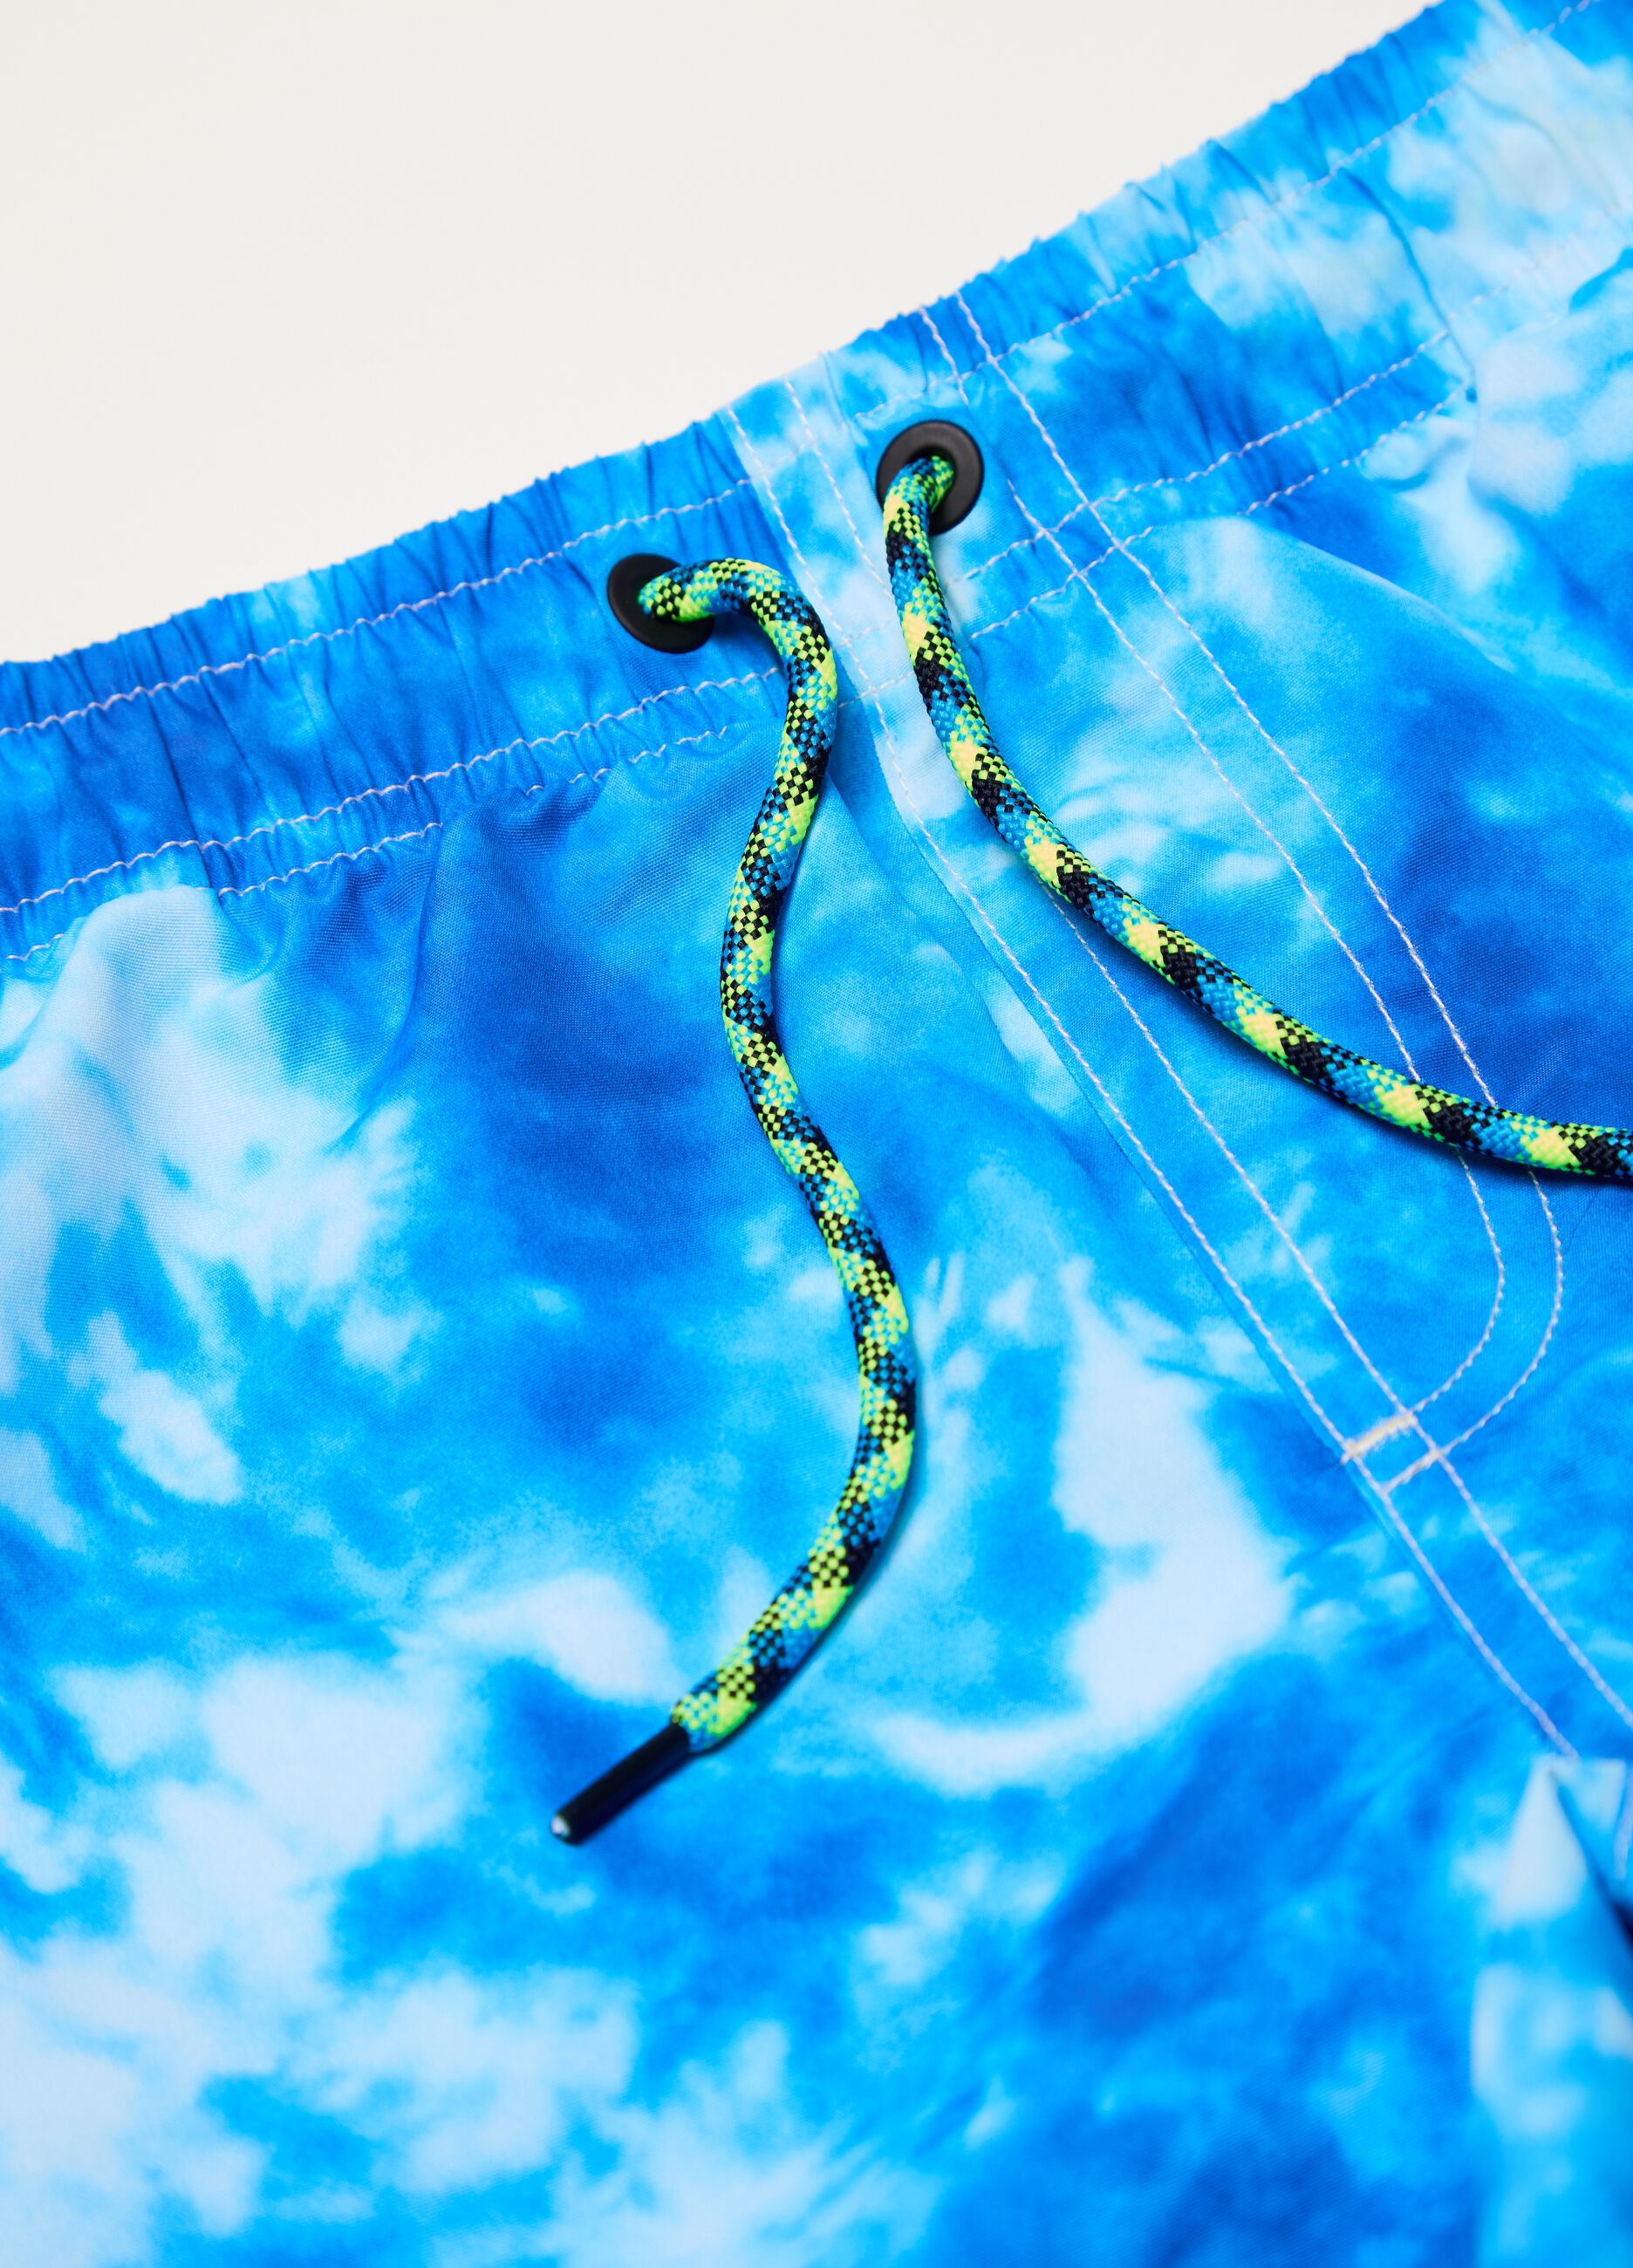 Swimming trunks with tie-dye pattern